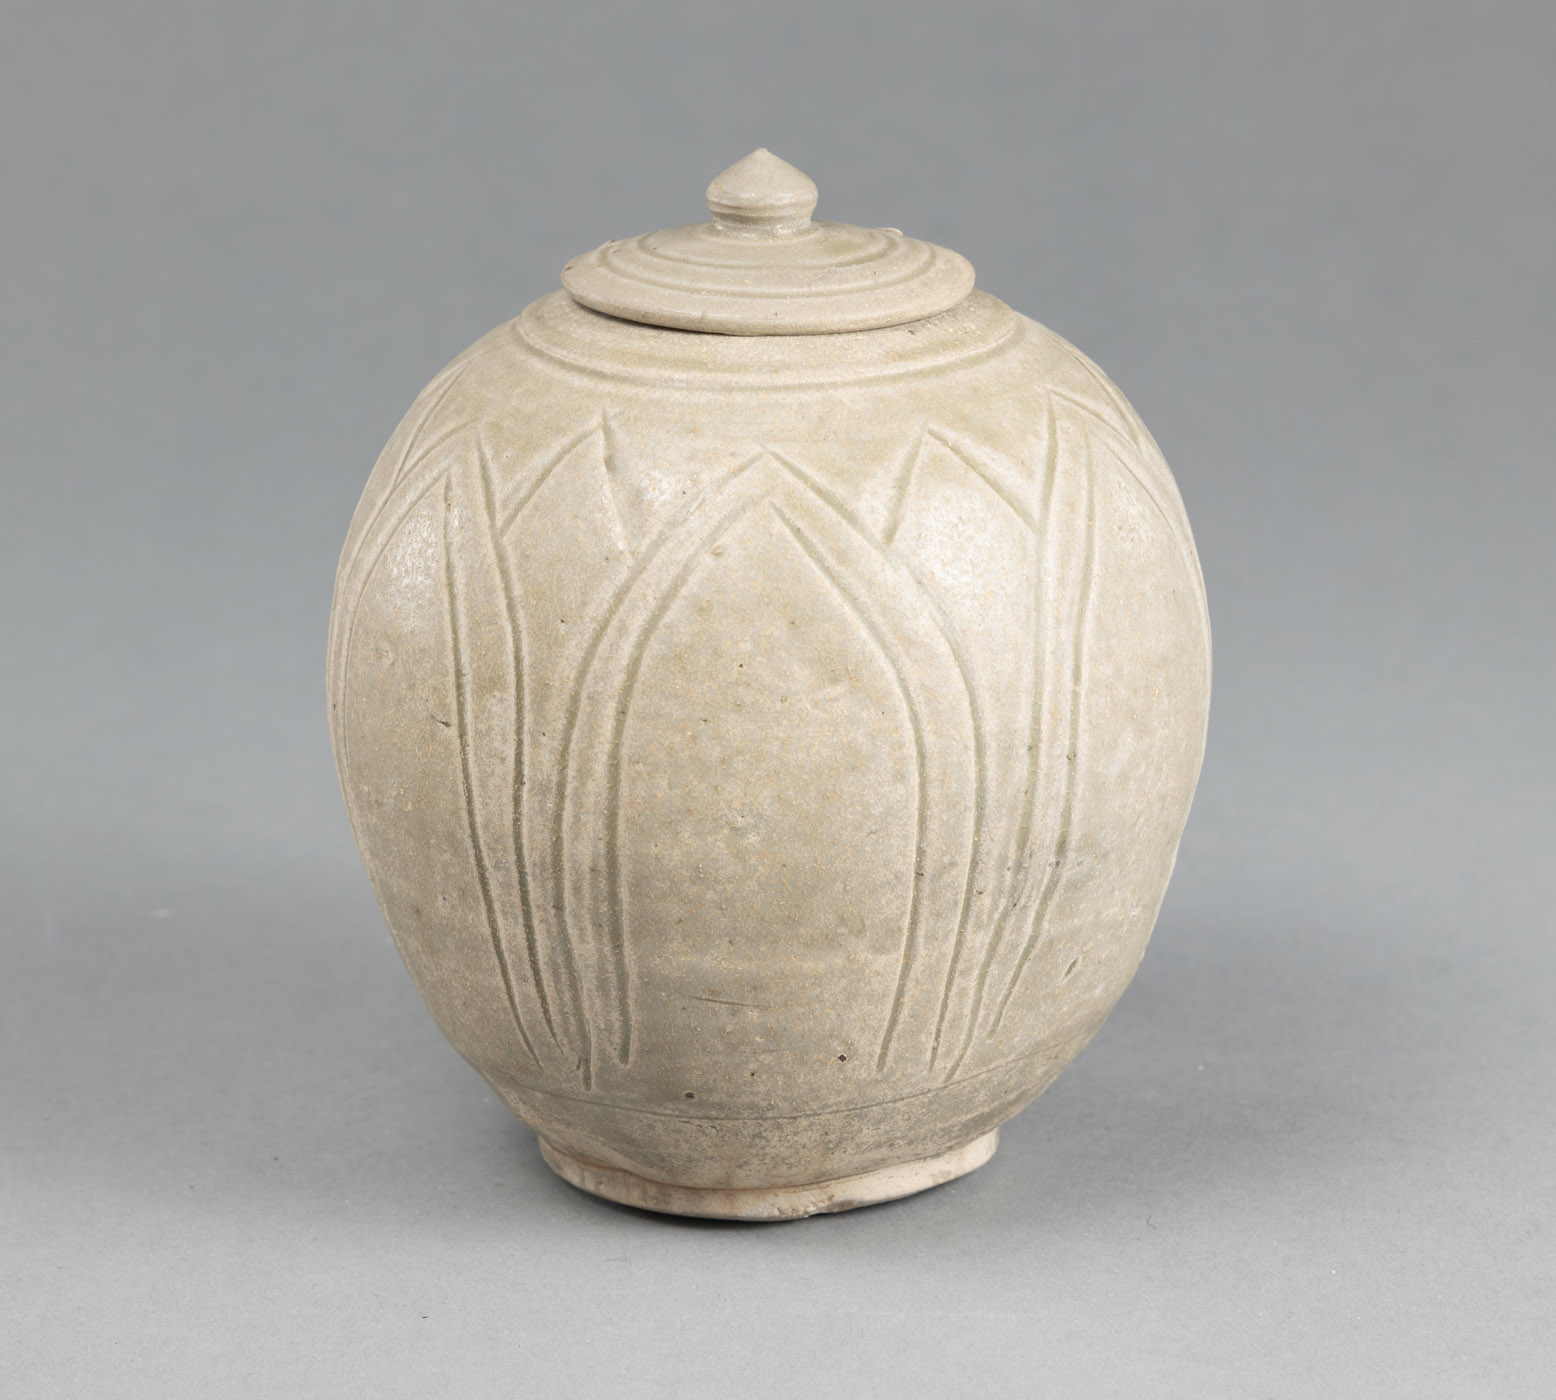 <b>A SPHERICAL YUE GREEN GLAZED STONEWARE VASE WITH COVER, DECORATED WITH INCISED LOTUS LEAVES PATTERN</b>